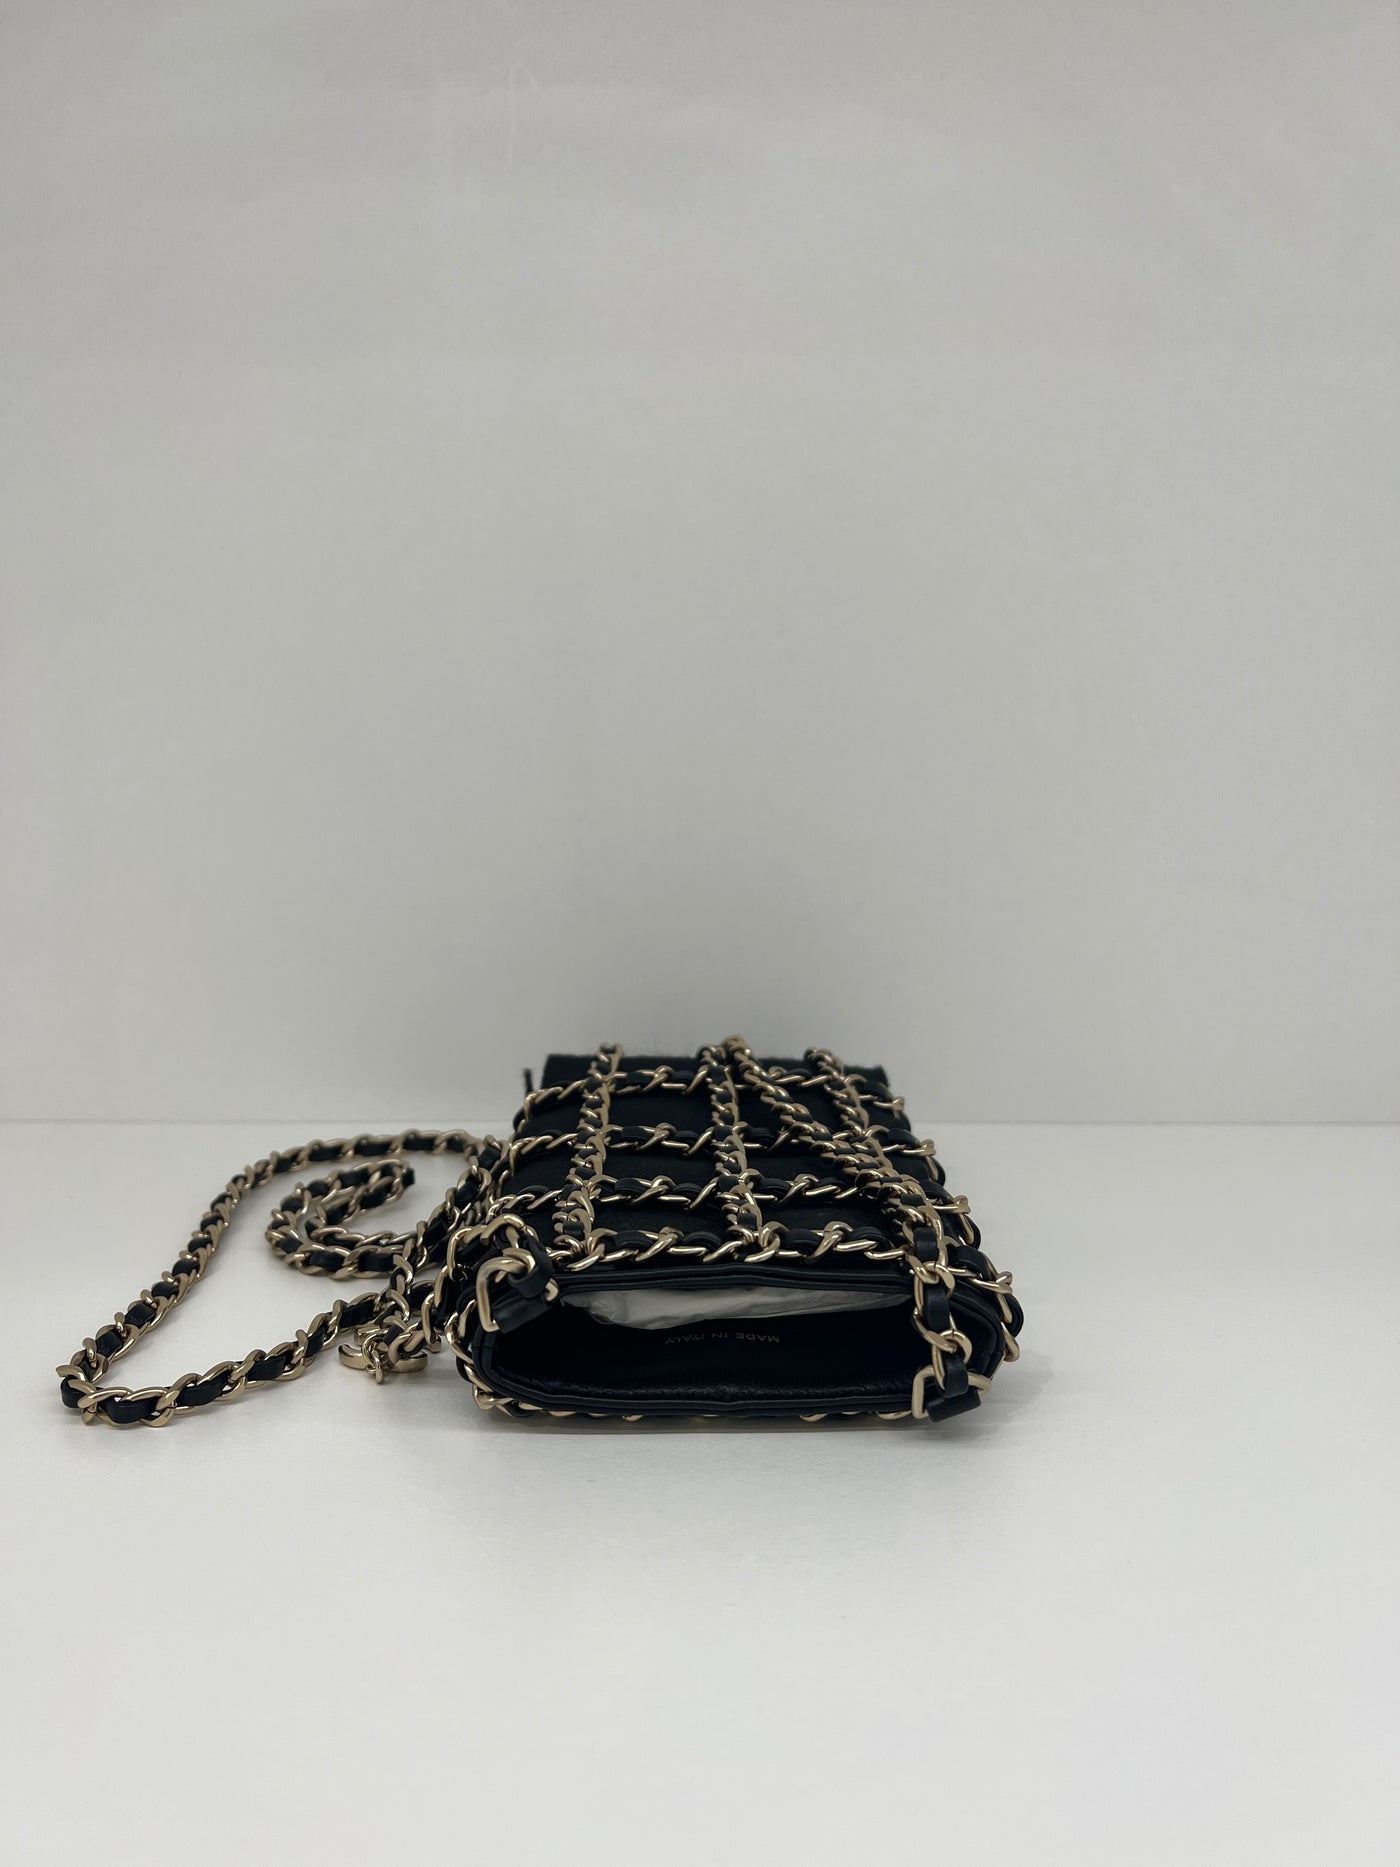 Chanel Gold Clutch Chain Phone Holder - Black - SOLD